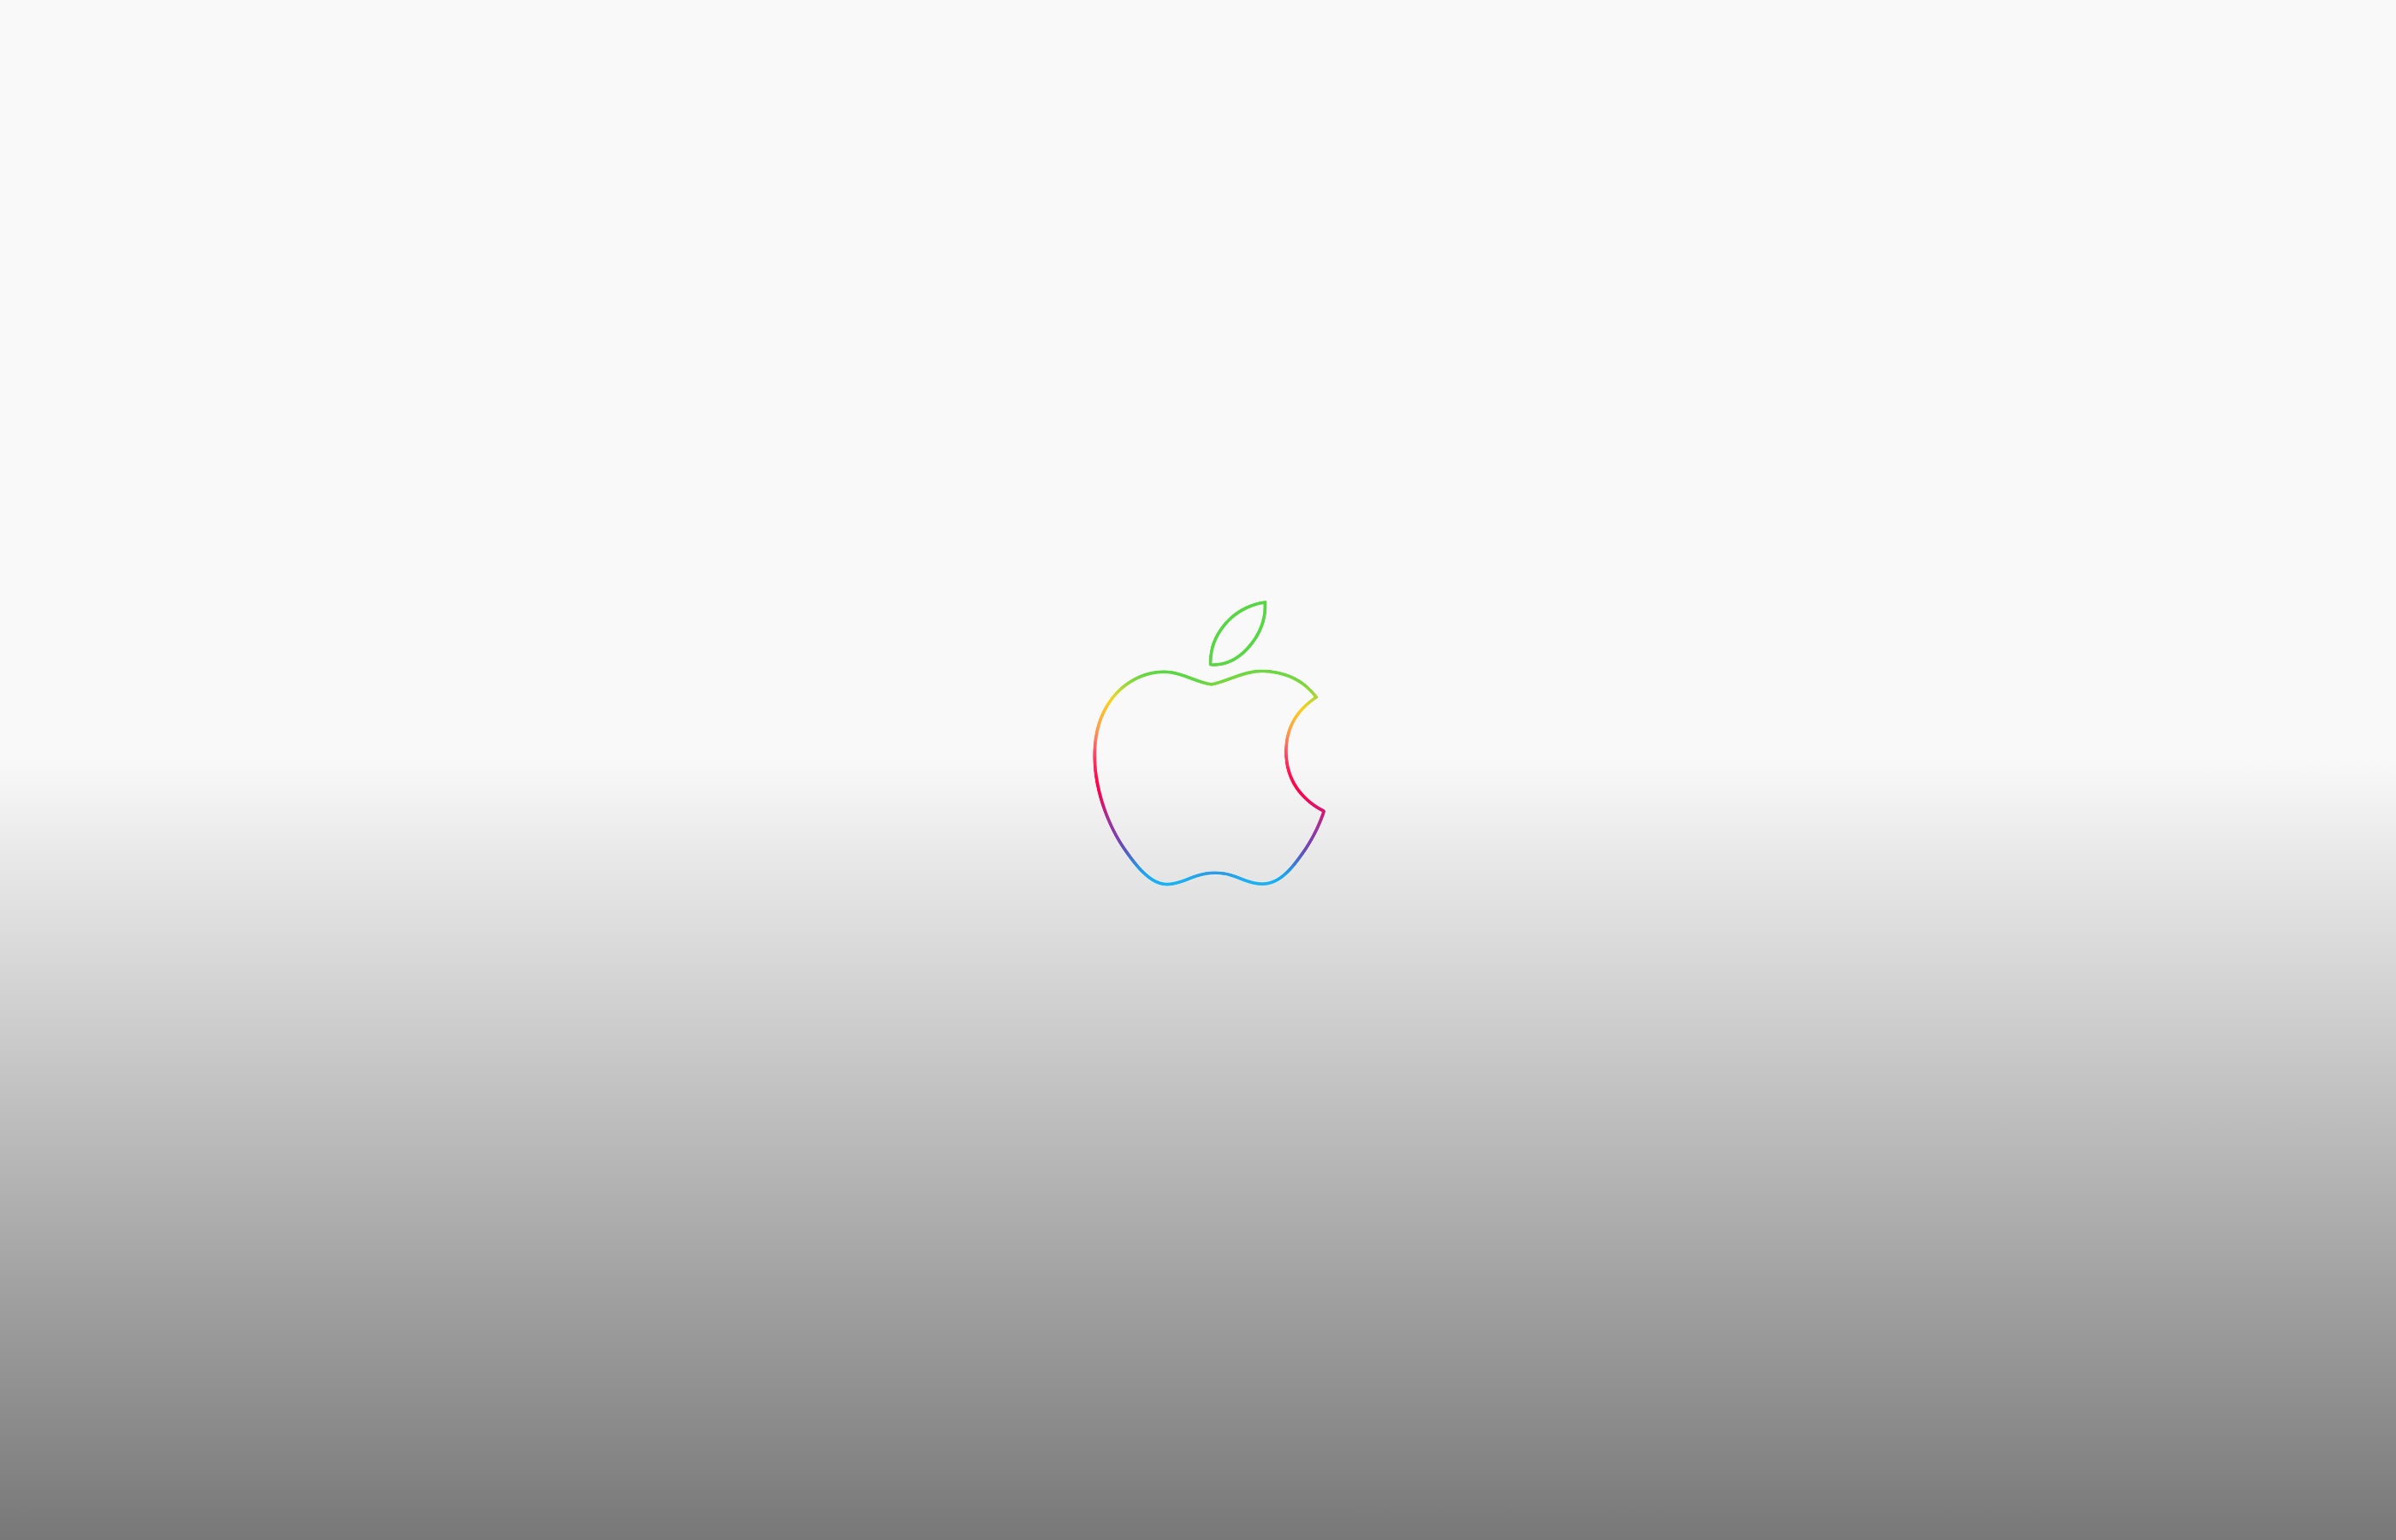 20 Excellent Apple Logo Wallpapers Osxdaily Images, Photos, Reviews